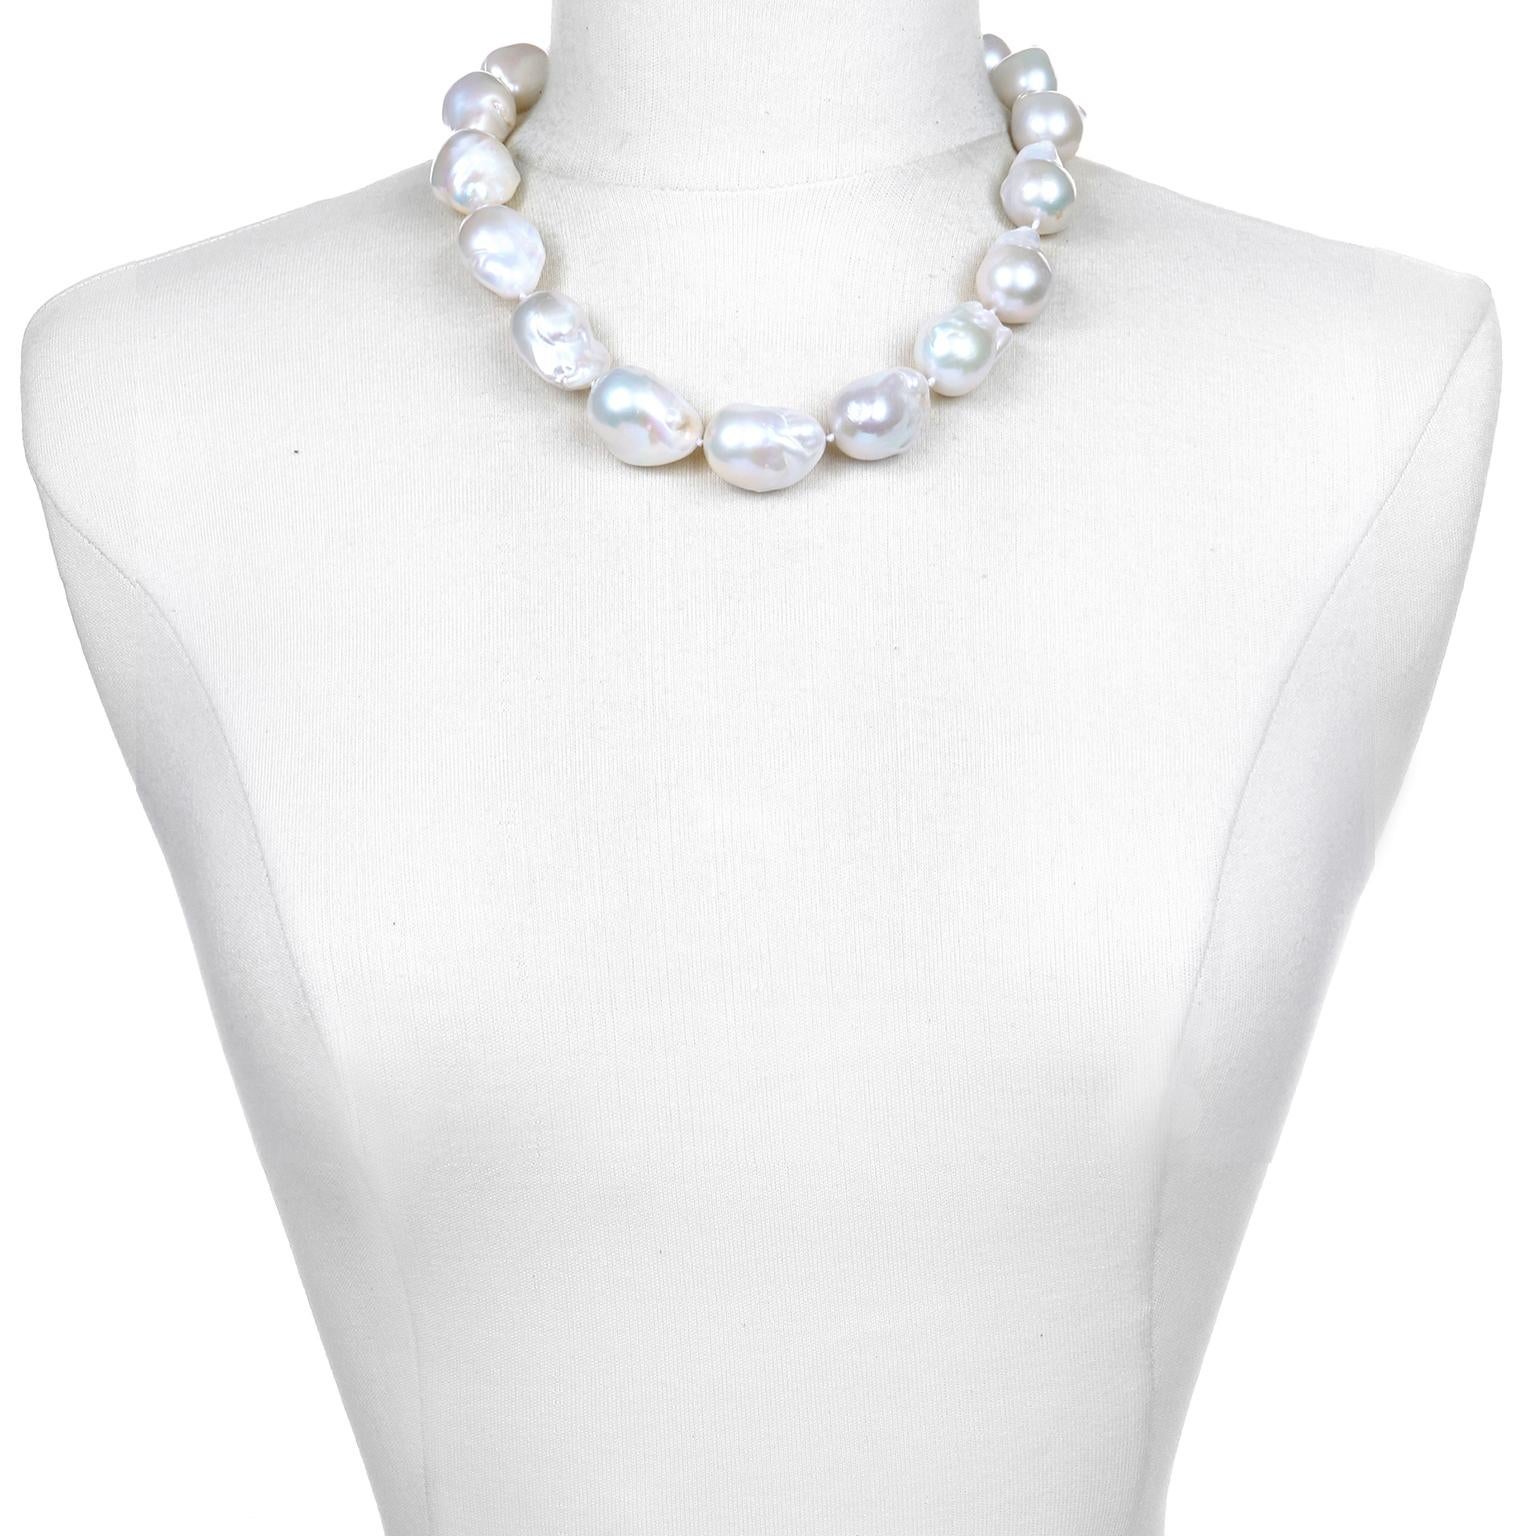 Make a statement!  This classic baroque cultured pearl necklace is a must for your jewelry wardrobe.  Whether you're going for down-town chic or formal, the soft color and organic shapes allow for a casual and sophisticated style.  It is finished